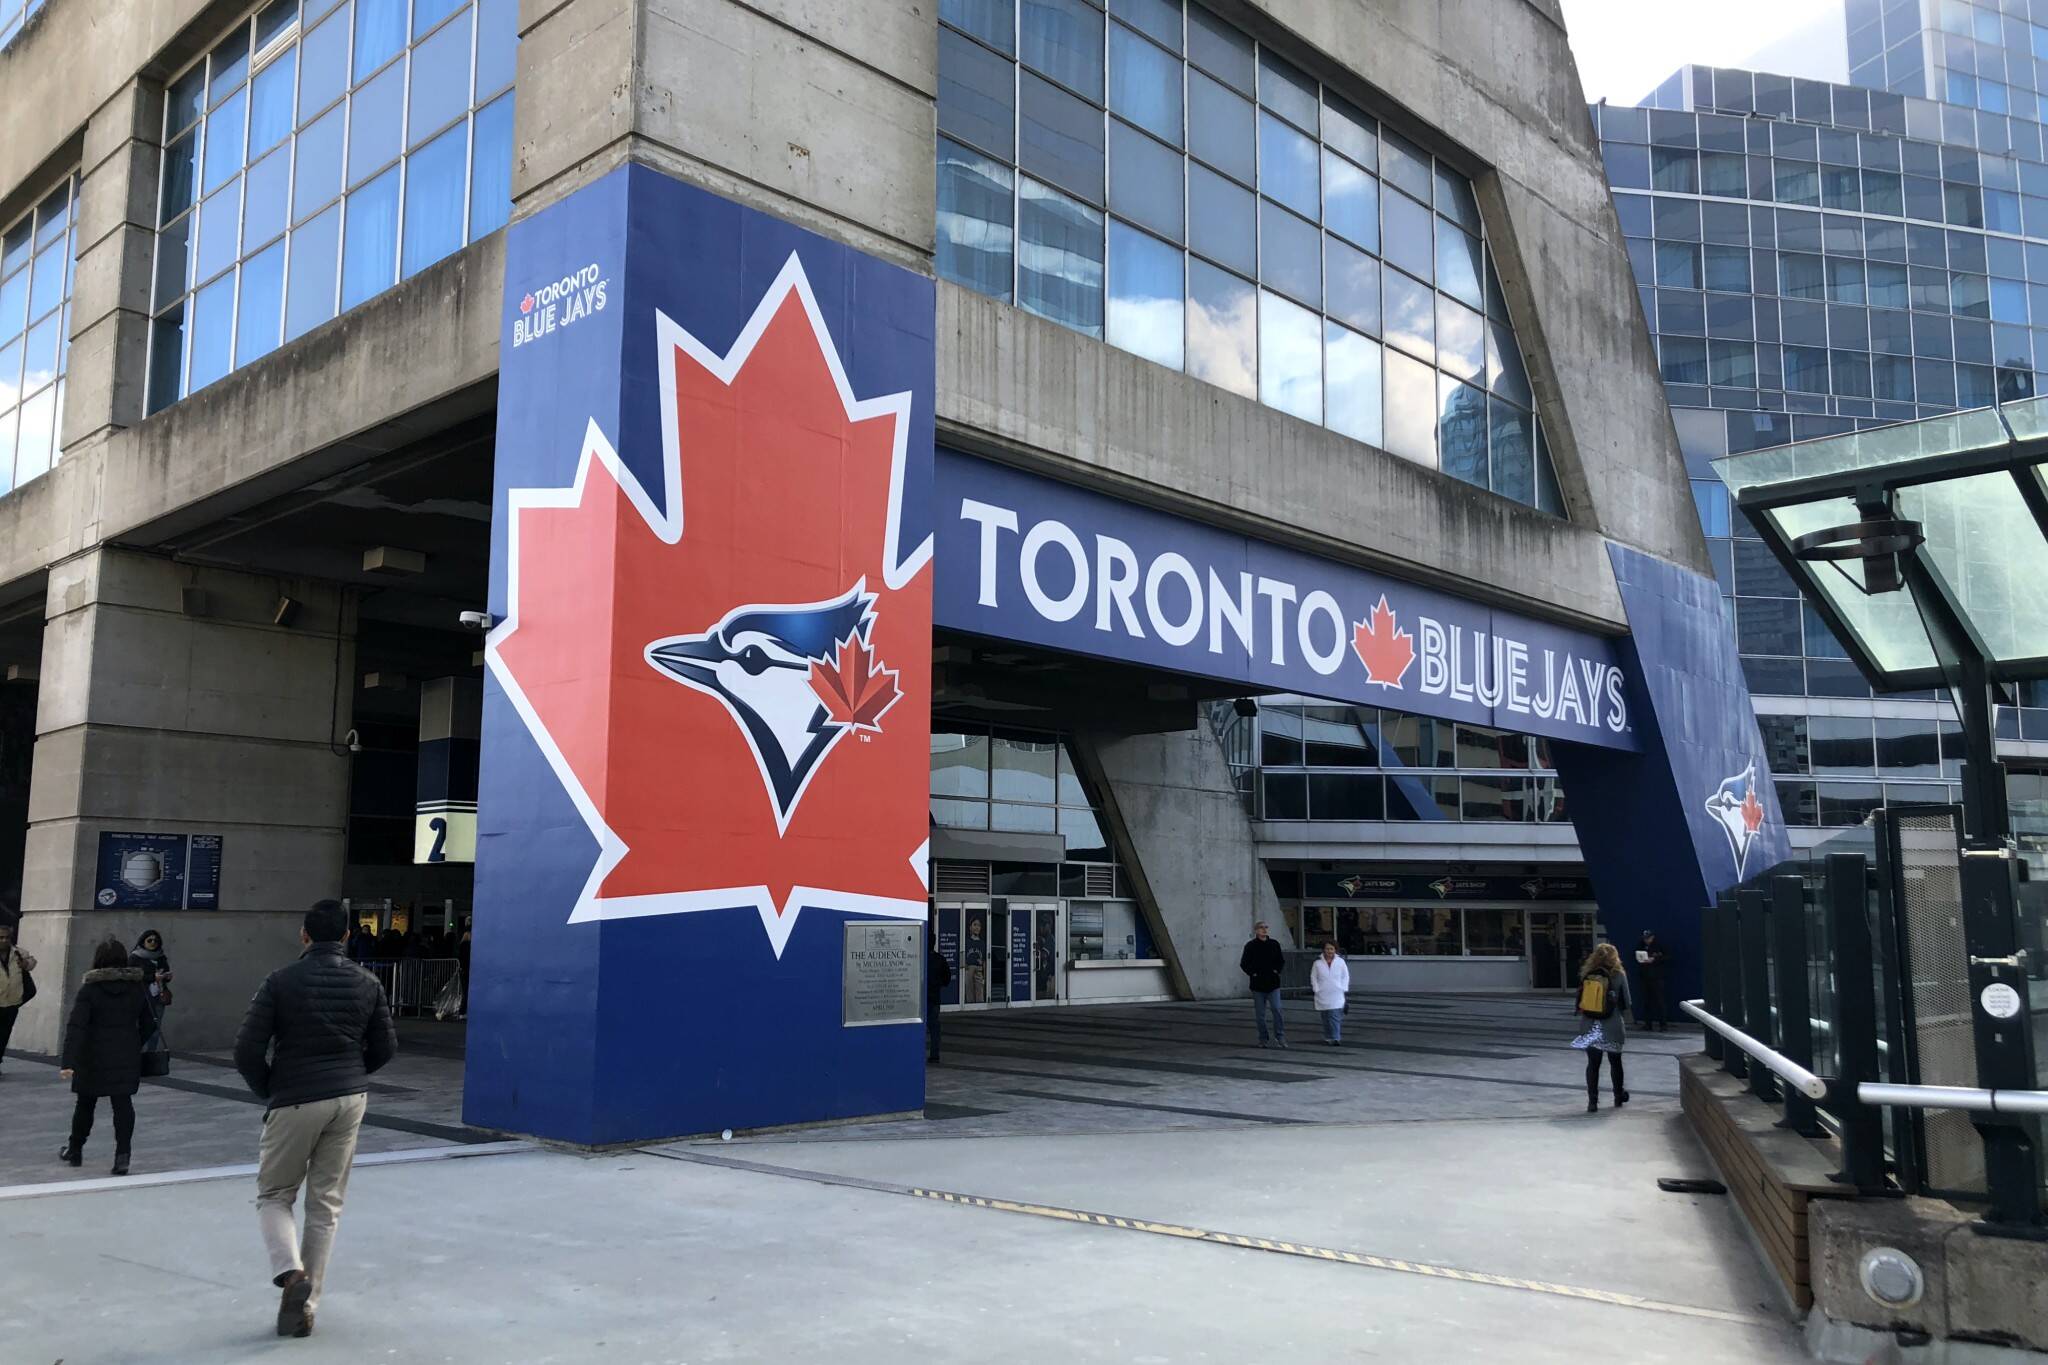 Scalpers in a foul mood over the Toronto Blue Jays